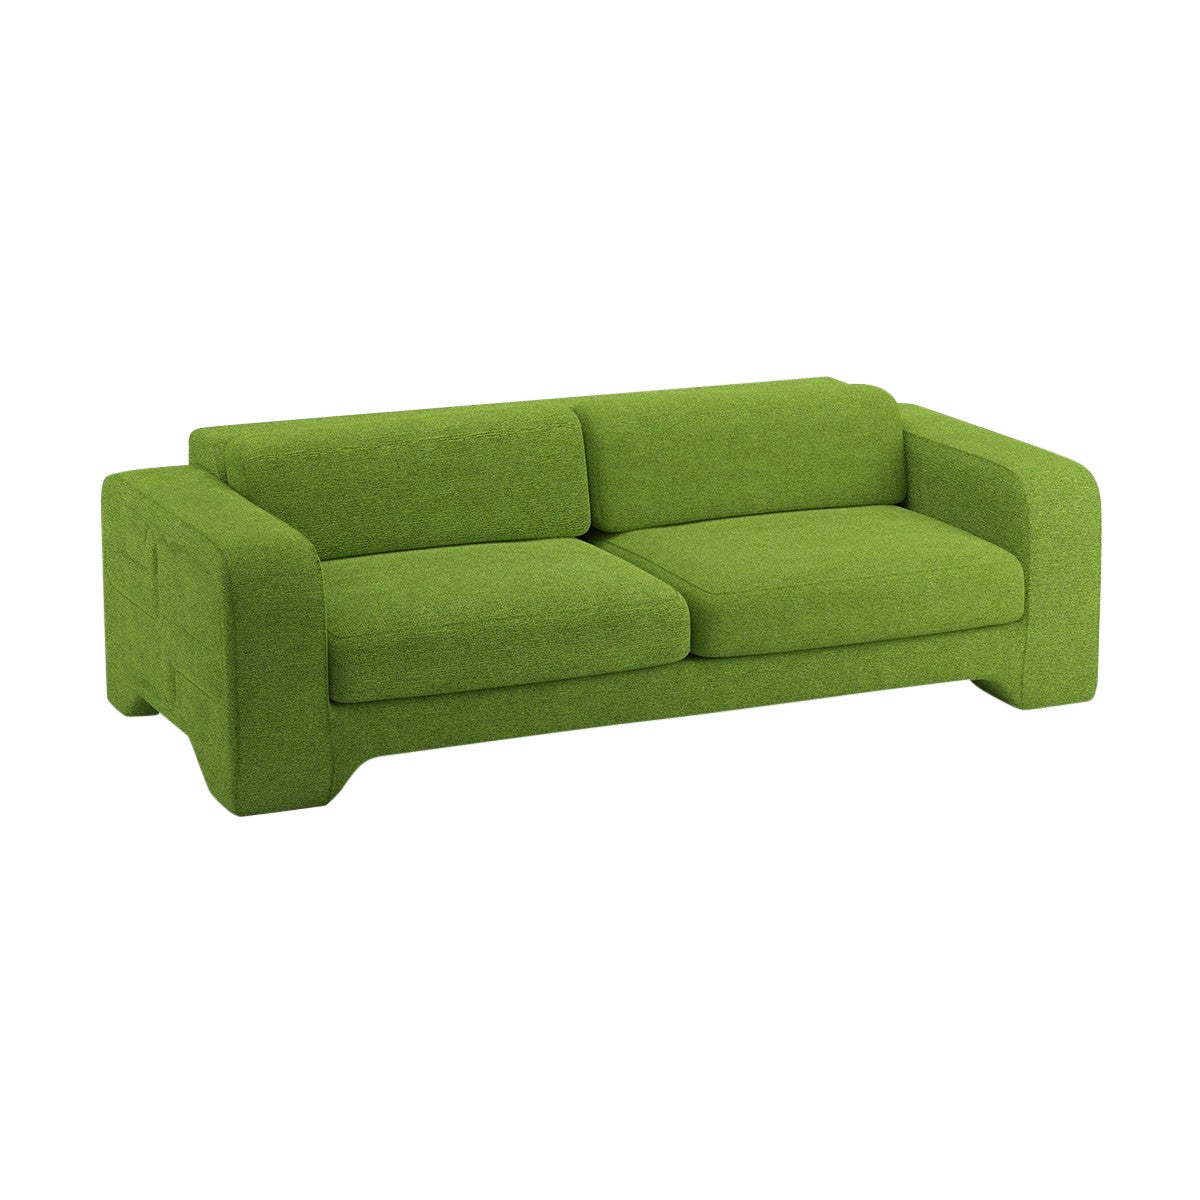 Popus Editions Giovanna 2.5 Seater Sofa in Grass Megeve Fabric with Knit Effect For Sale